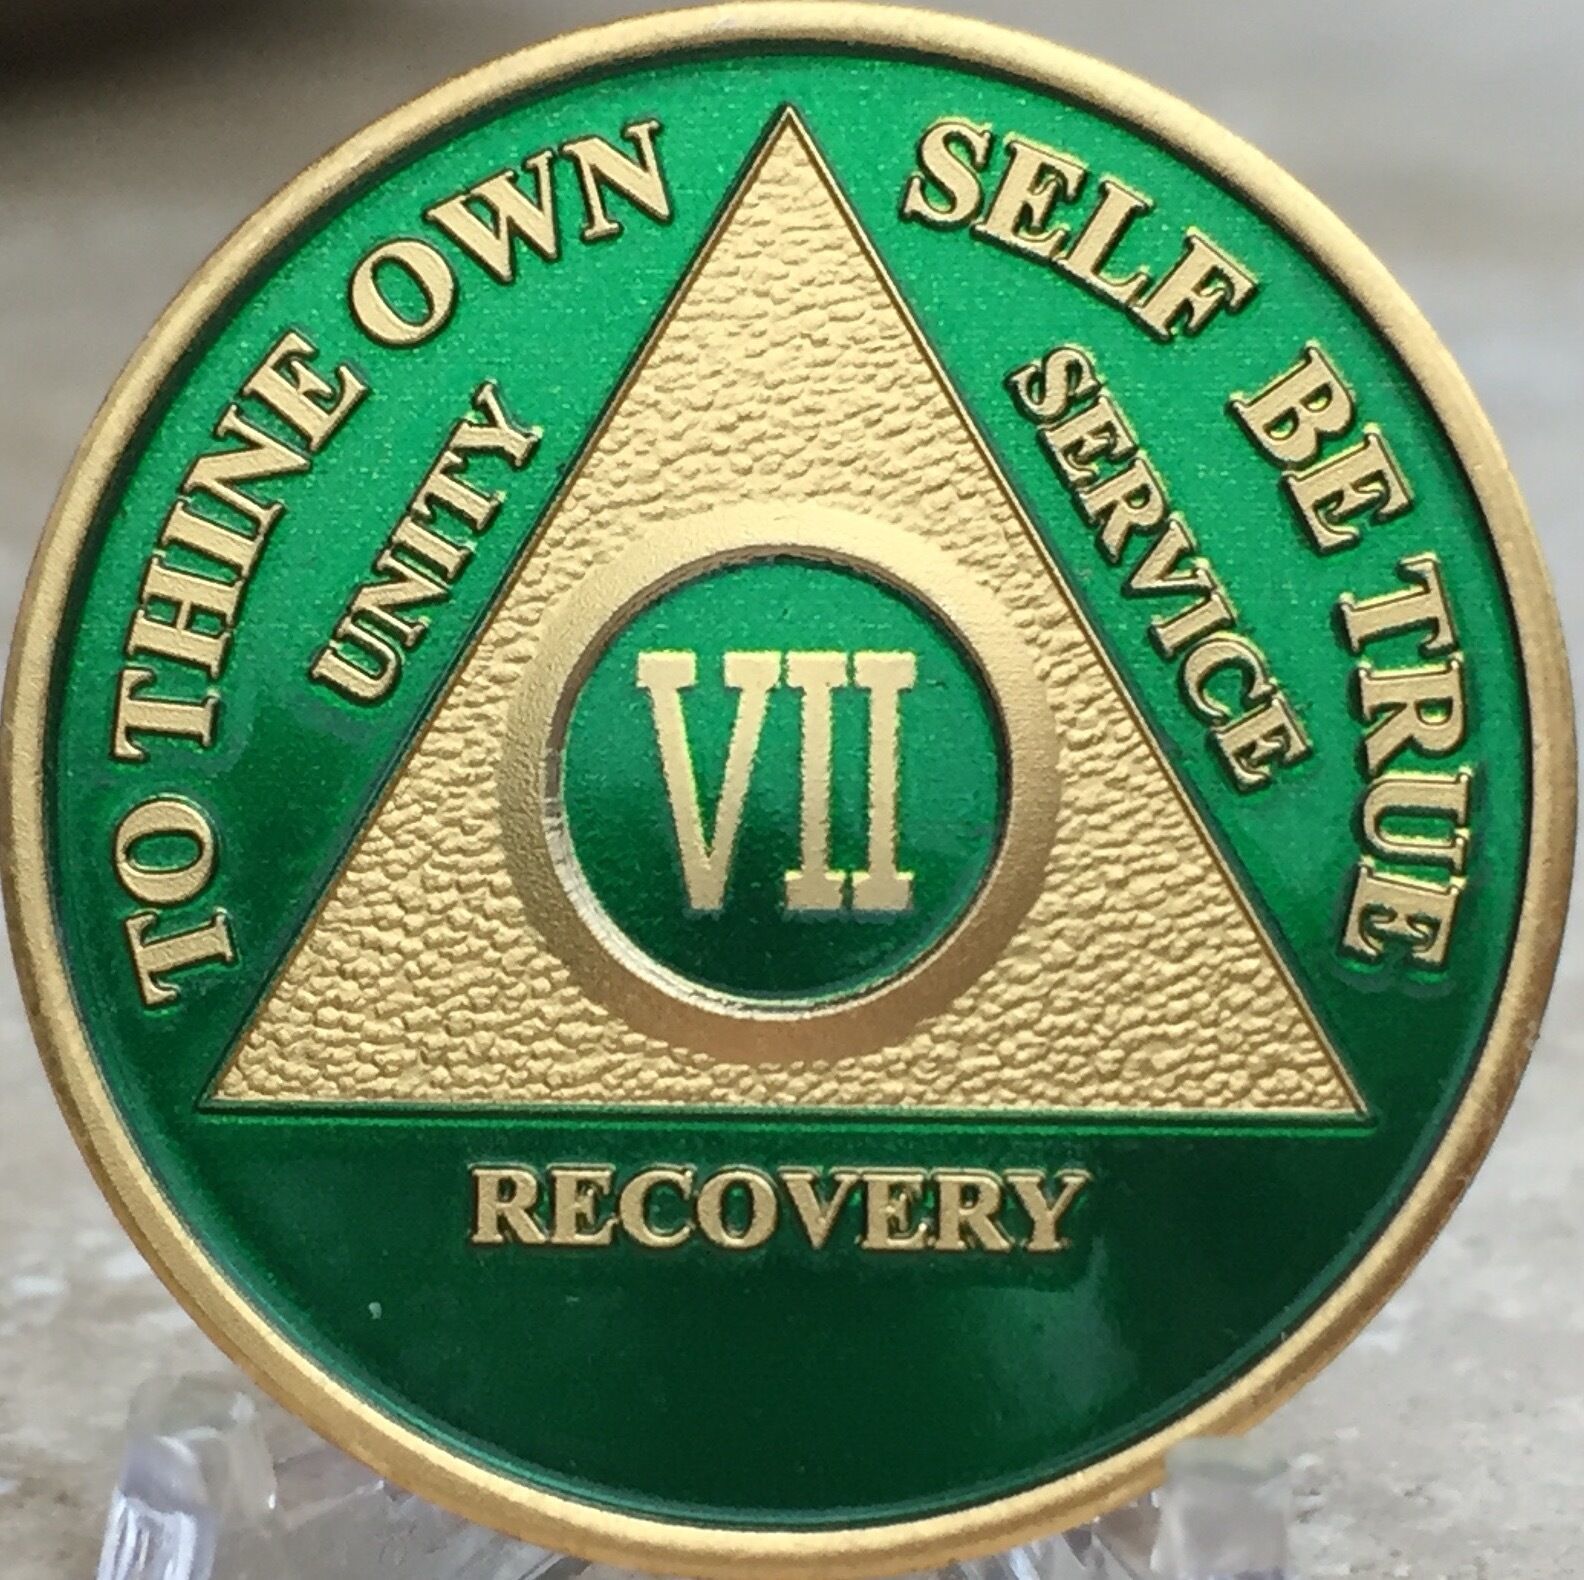 7 Year AA Medallion Green Gold Plated Alcoholics Anonymous Sobriety Chip Coin